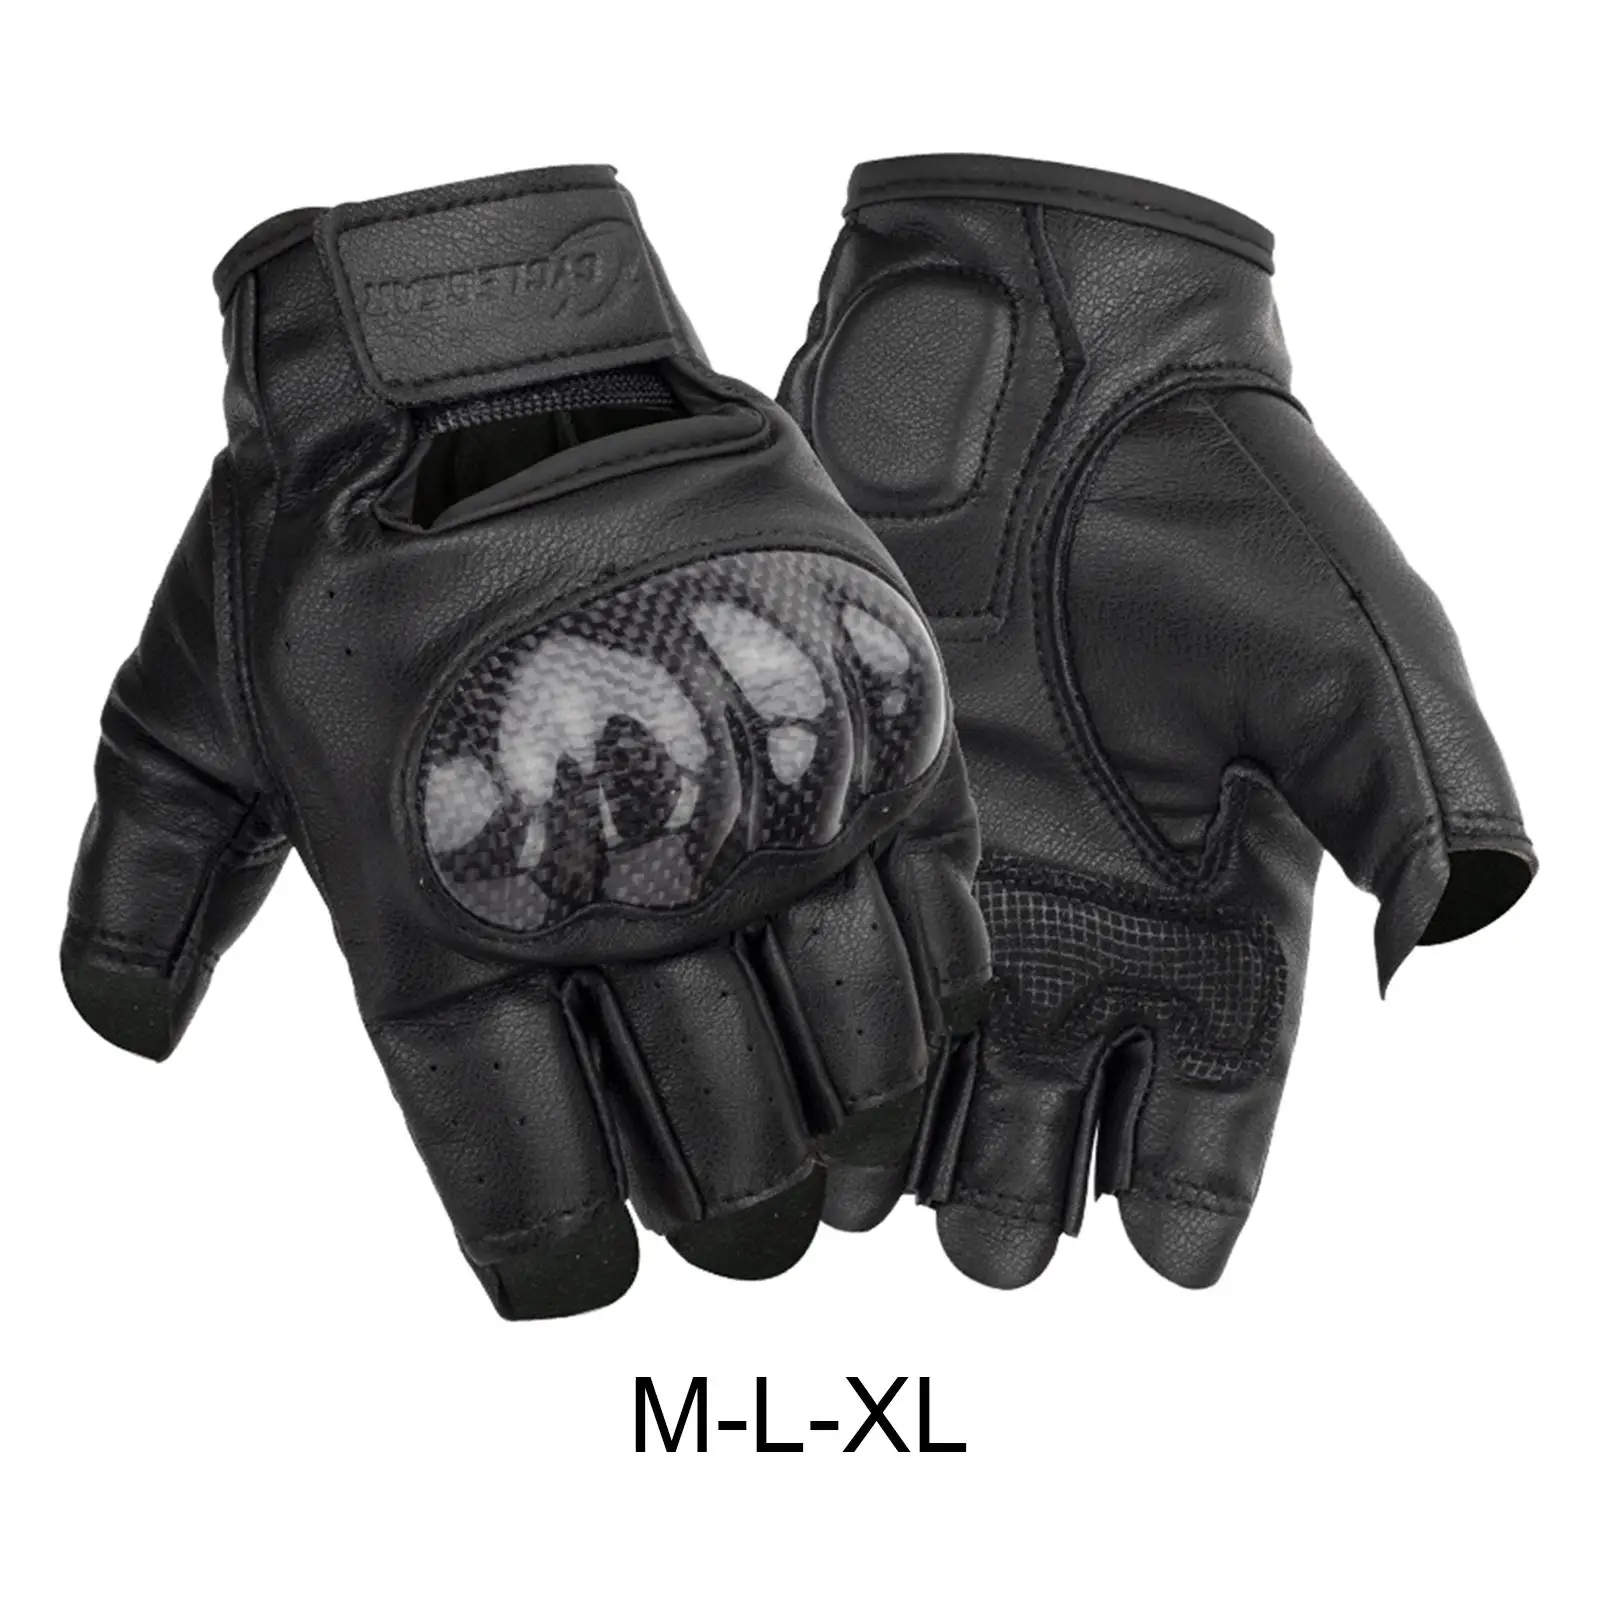 Motorcycle Gloves Half Finger PU Leather Hard Knuckle Anti Slip for Workout Motocross Outdoor Sport Driving Summer